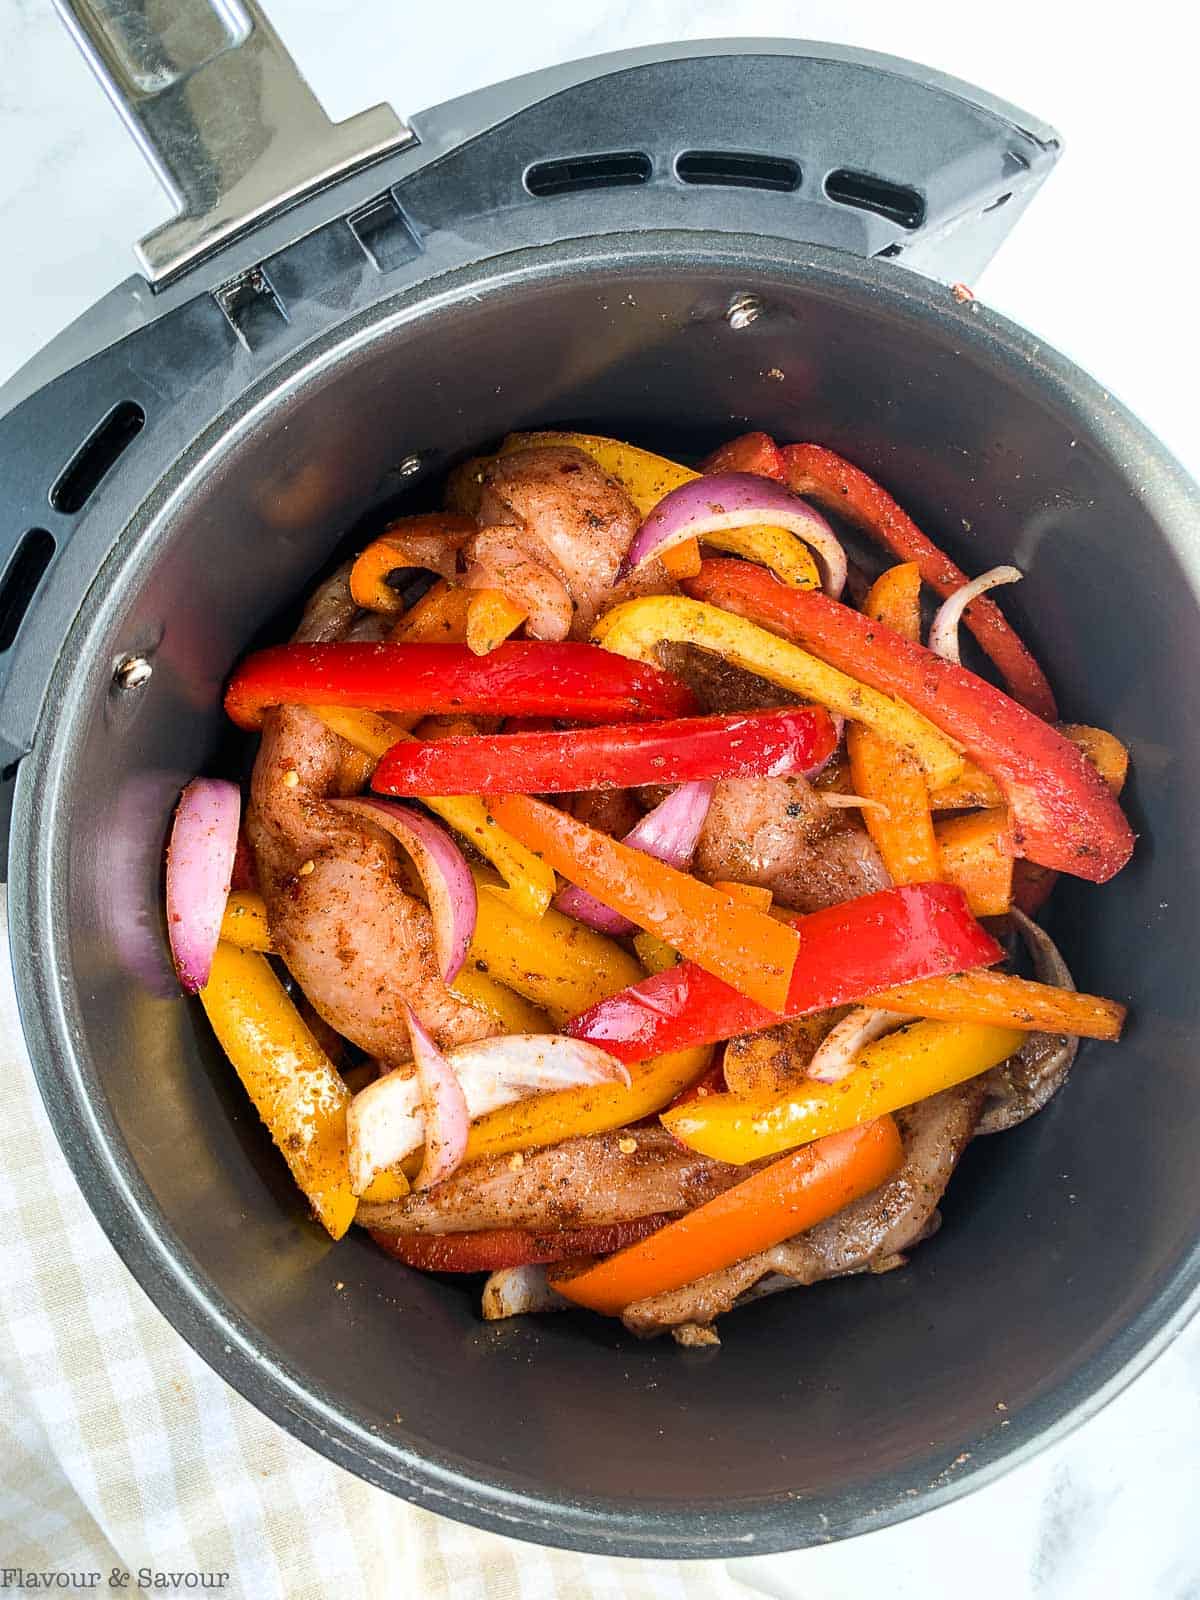 Sliced peppers and chicken in an air fryer basket